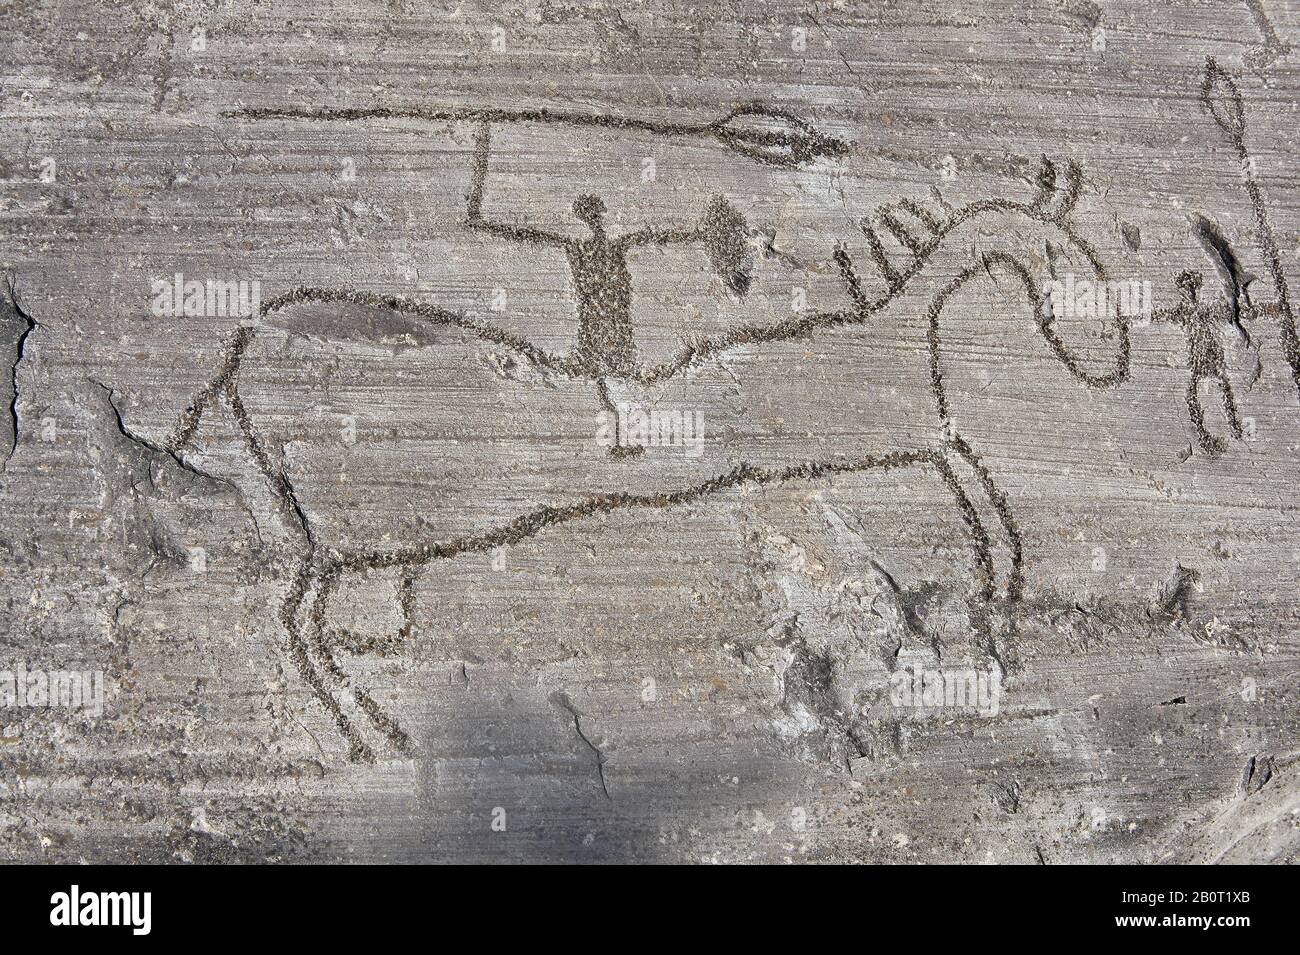 Petroglyph, rock carving, of a man with a spear on a horse carved by the ancient Camuni people in the iron age between  900-1200 BC. Rock 26-27, Foppi Stock Photo